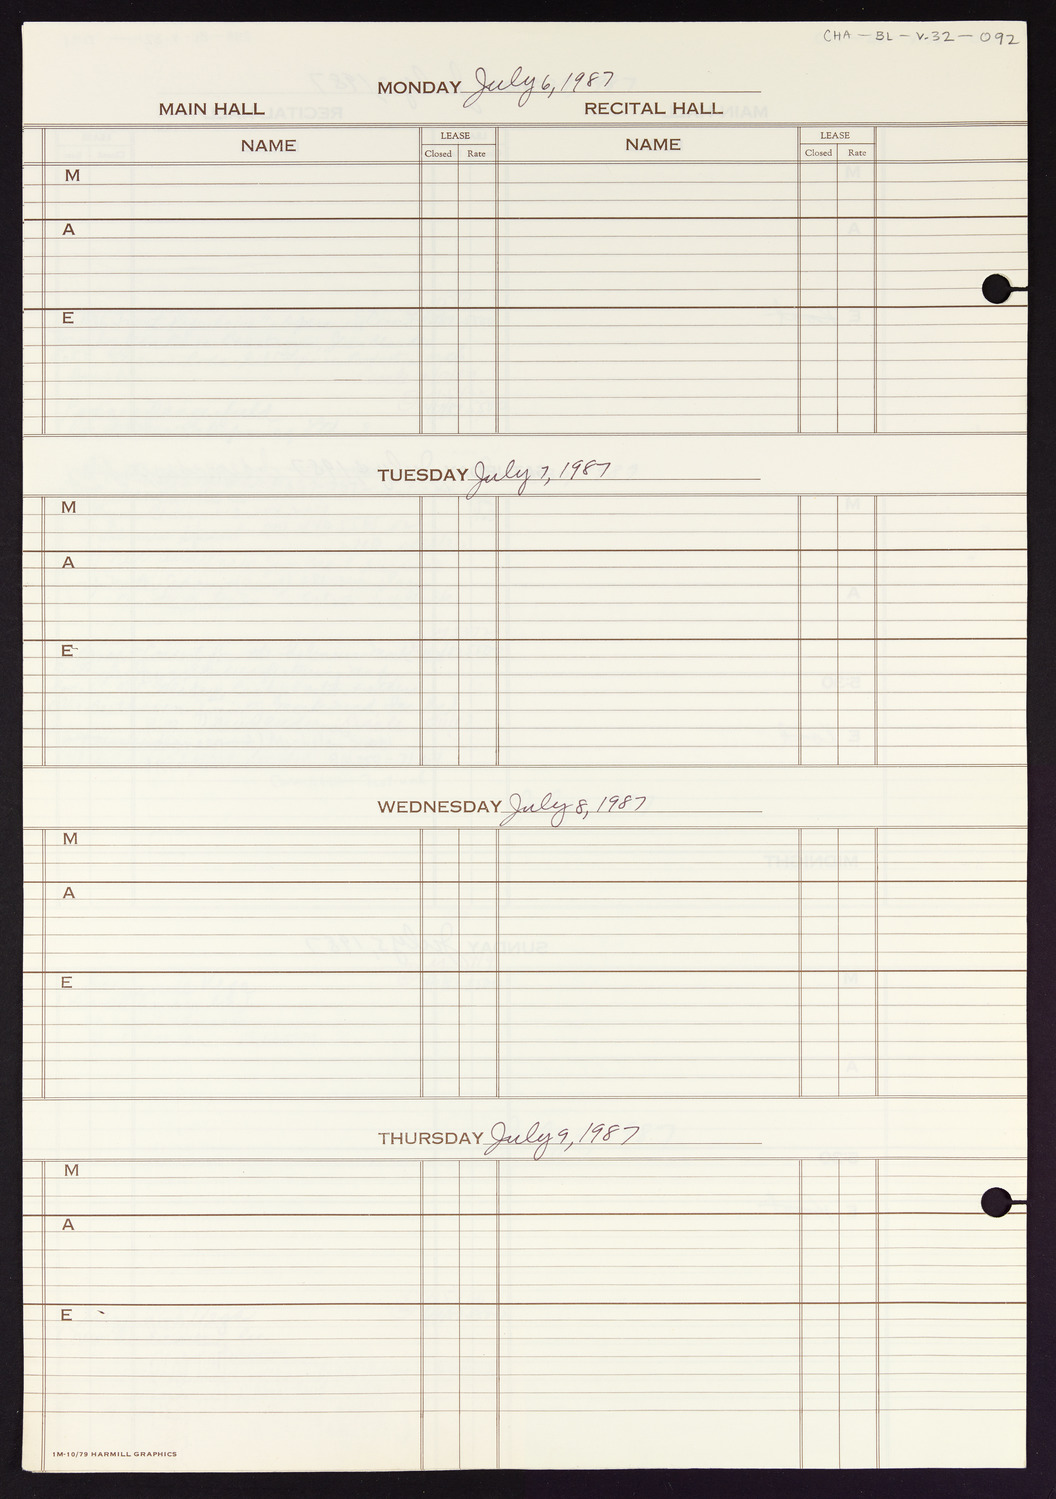 Carnegie Hall Booking Ledger, volume 32, page 92